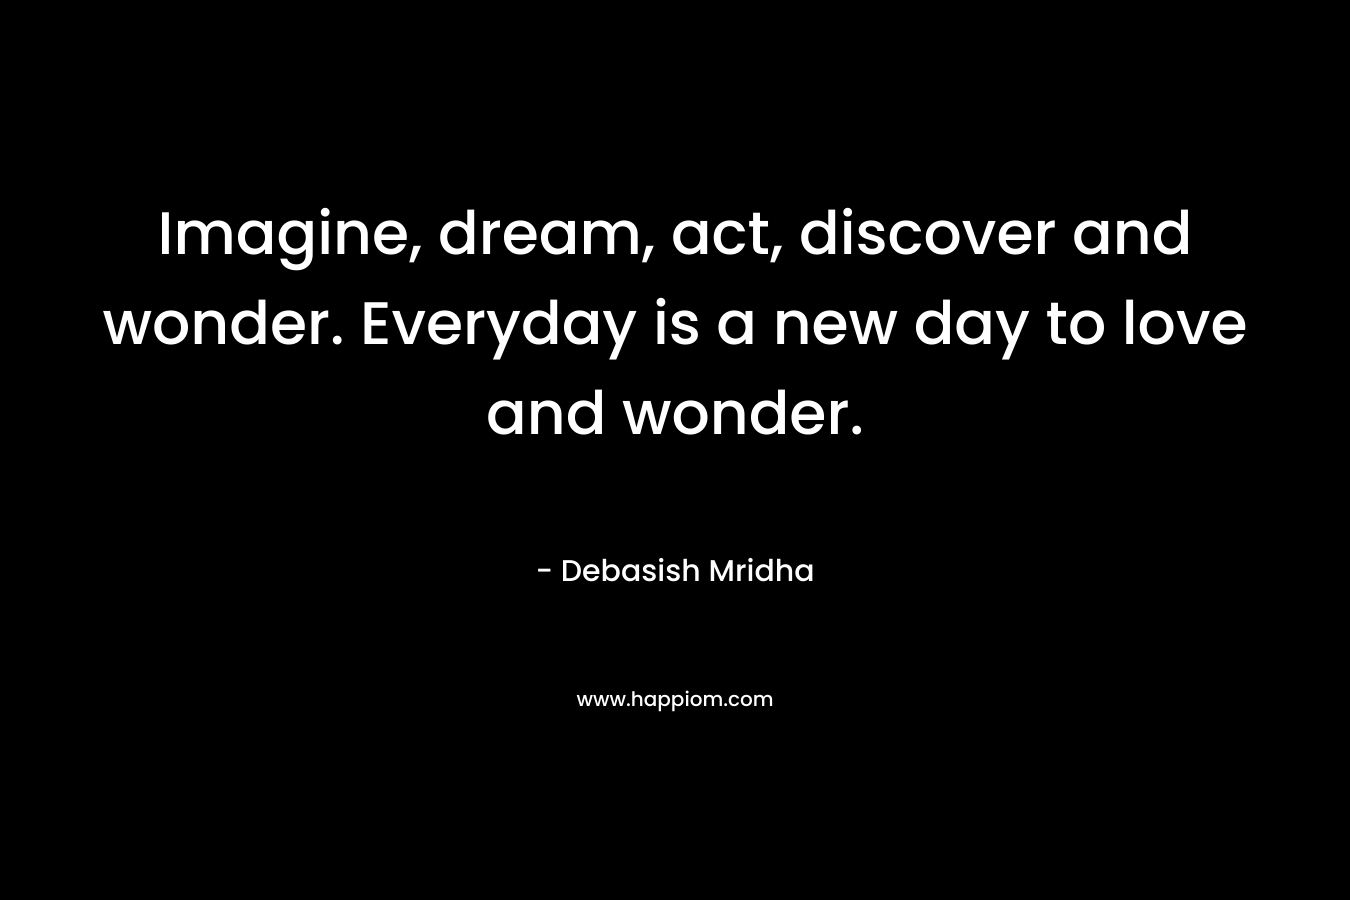 Imagine, dream, act, discover and wonder. Everyday is a new day to love and wonder.